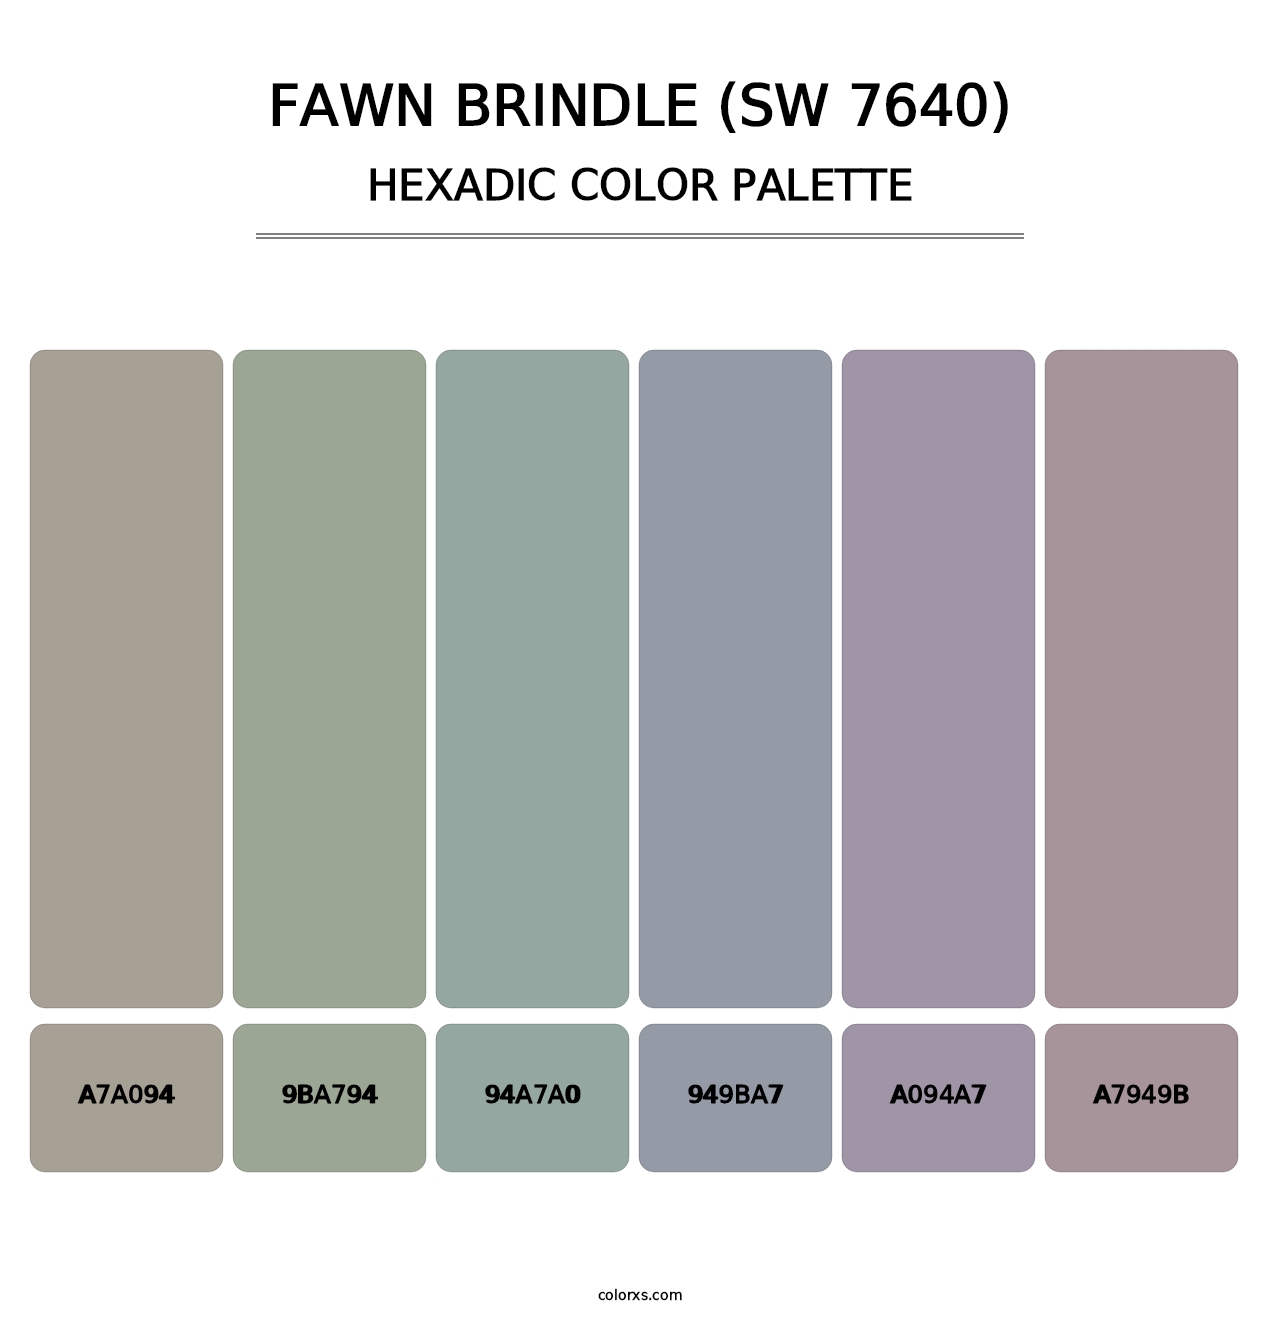 Fawn Brindle (SW 7640) - Hexadic Color Palette